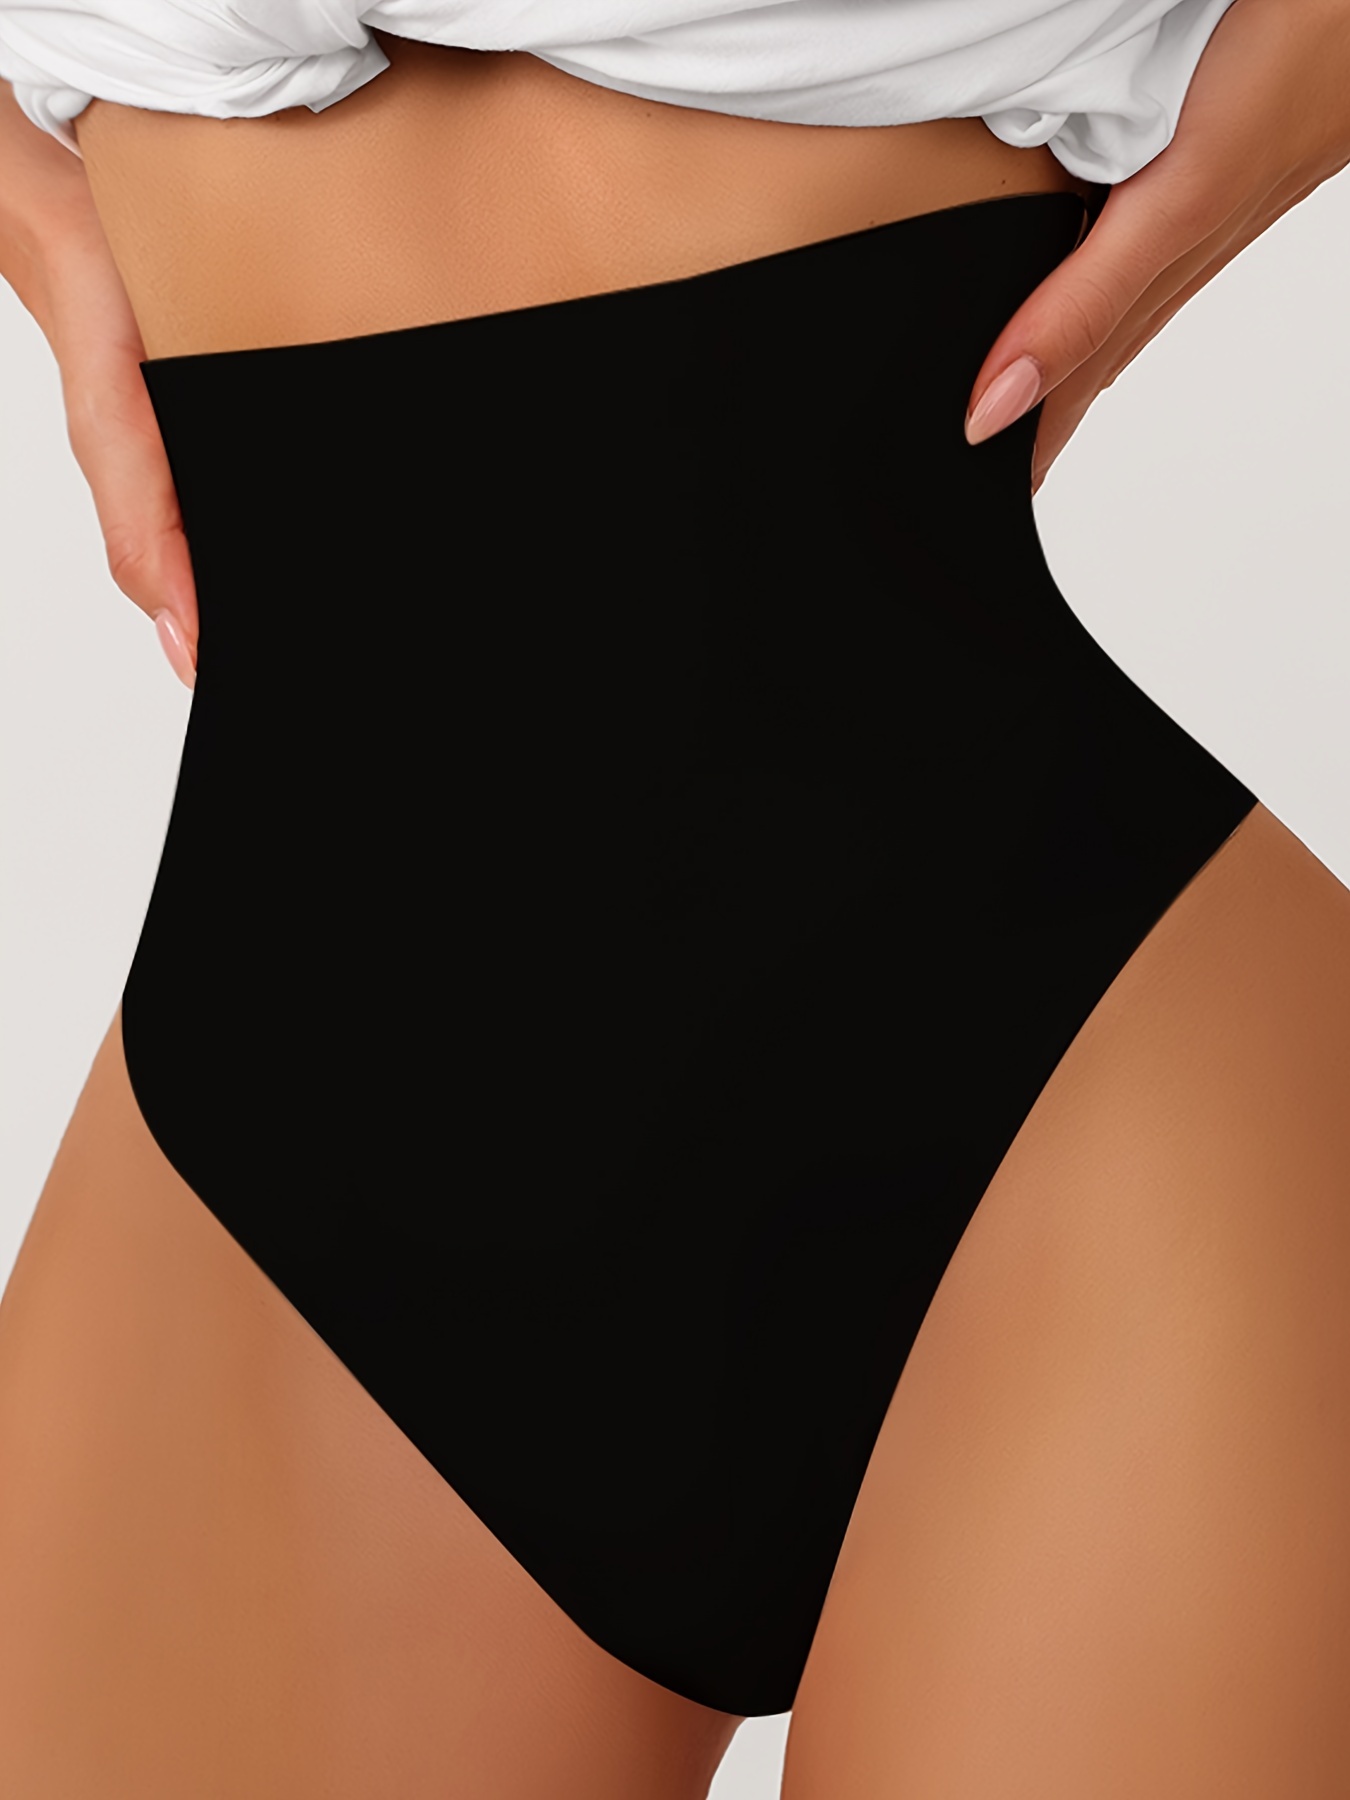 Body Shaping Control Panties, Comfy Adjustable Tummy Control Thong, Women's  Lingerie & Underwear